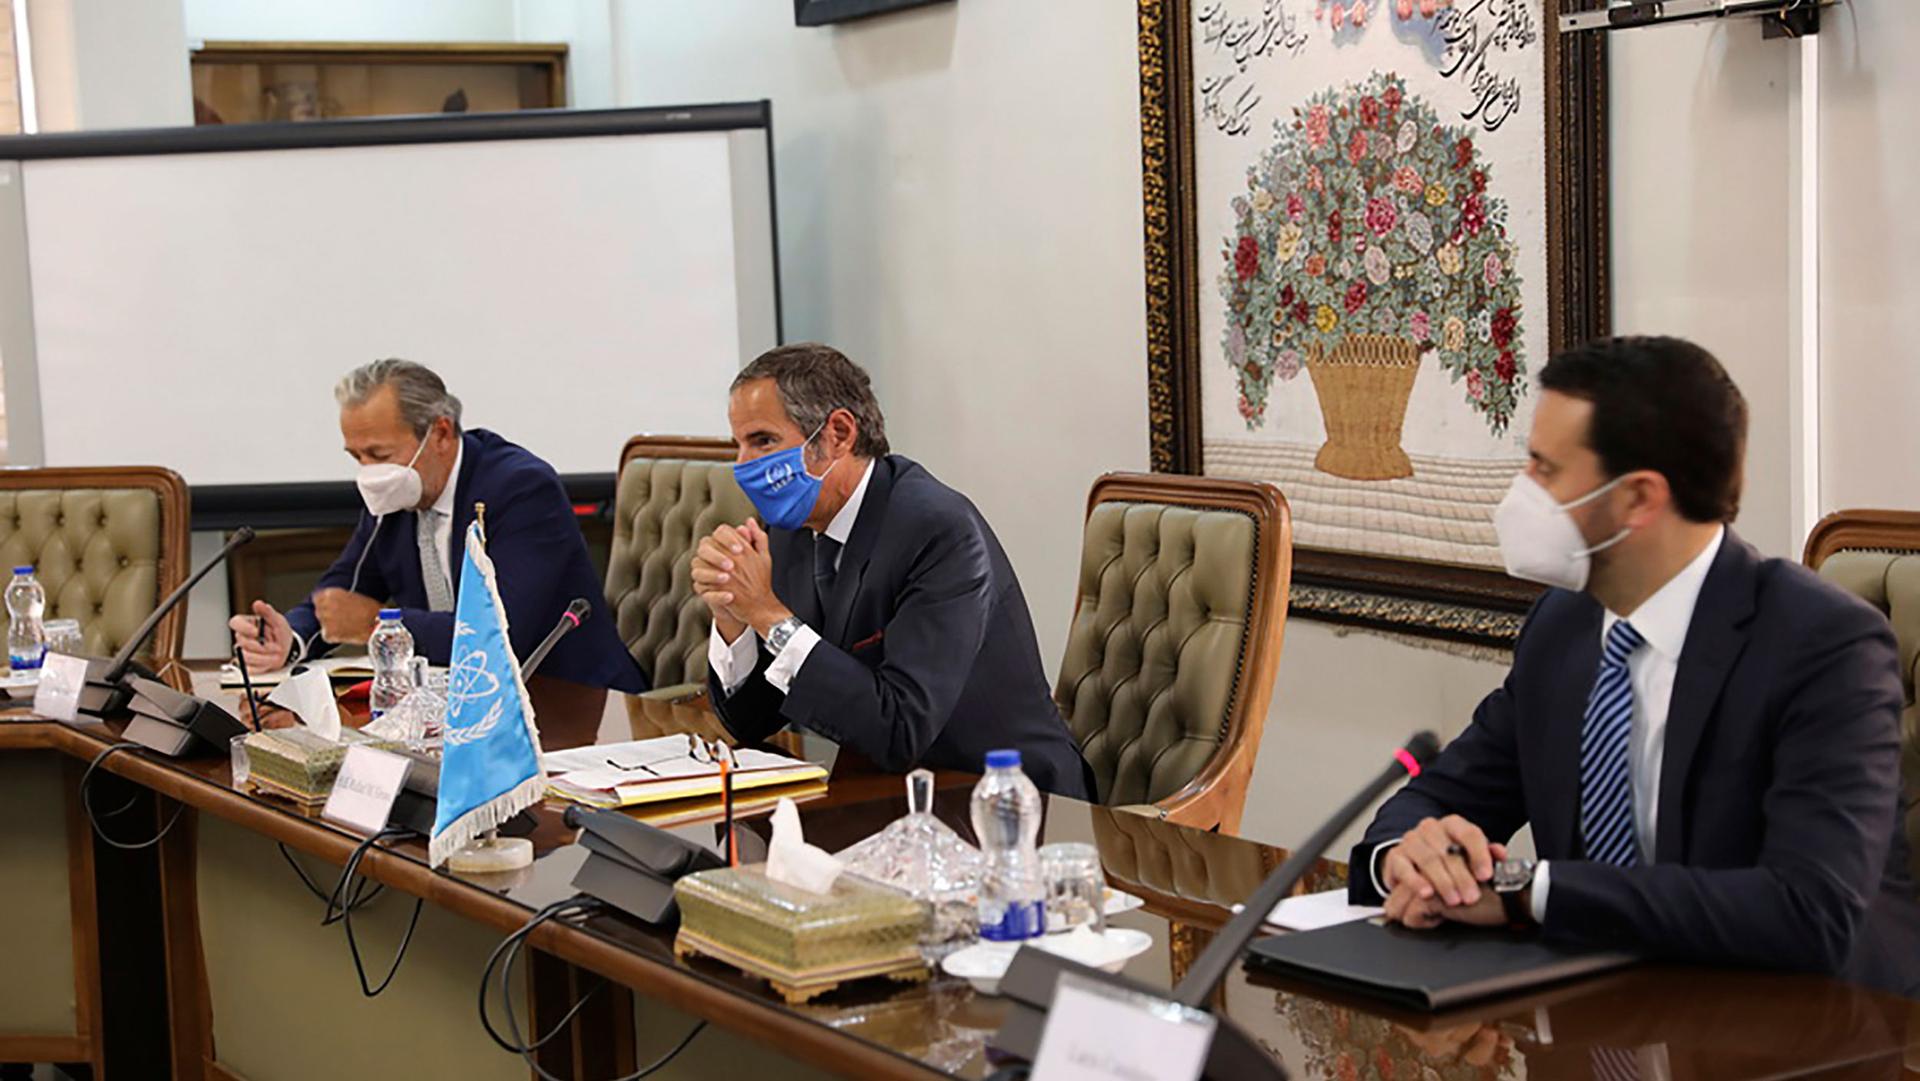 Rafael Mariano Grossi, director-general of International Atomic Energy Agency, IAEA, center, attends a meeting with the Head of Atomic Energy Organization of Iran, Mohammad Eslami, in Tehran, Iran, Sunday, Sept. 12, 2021.